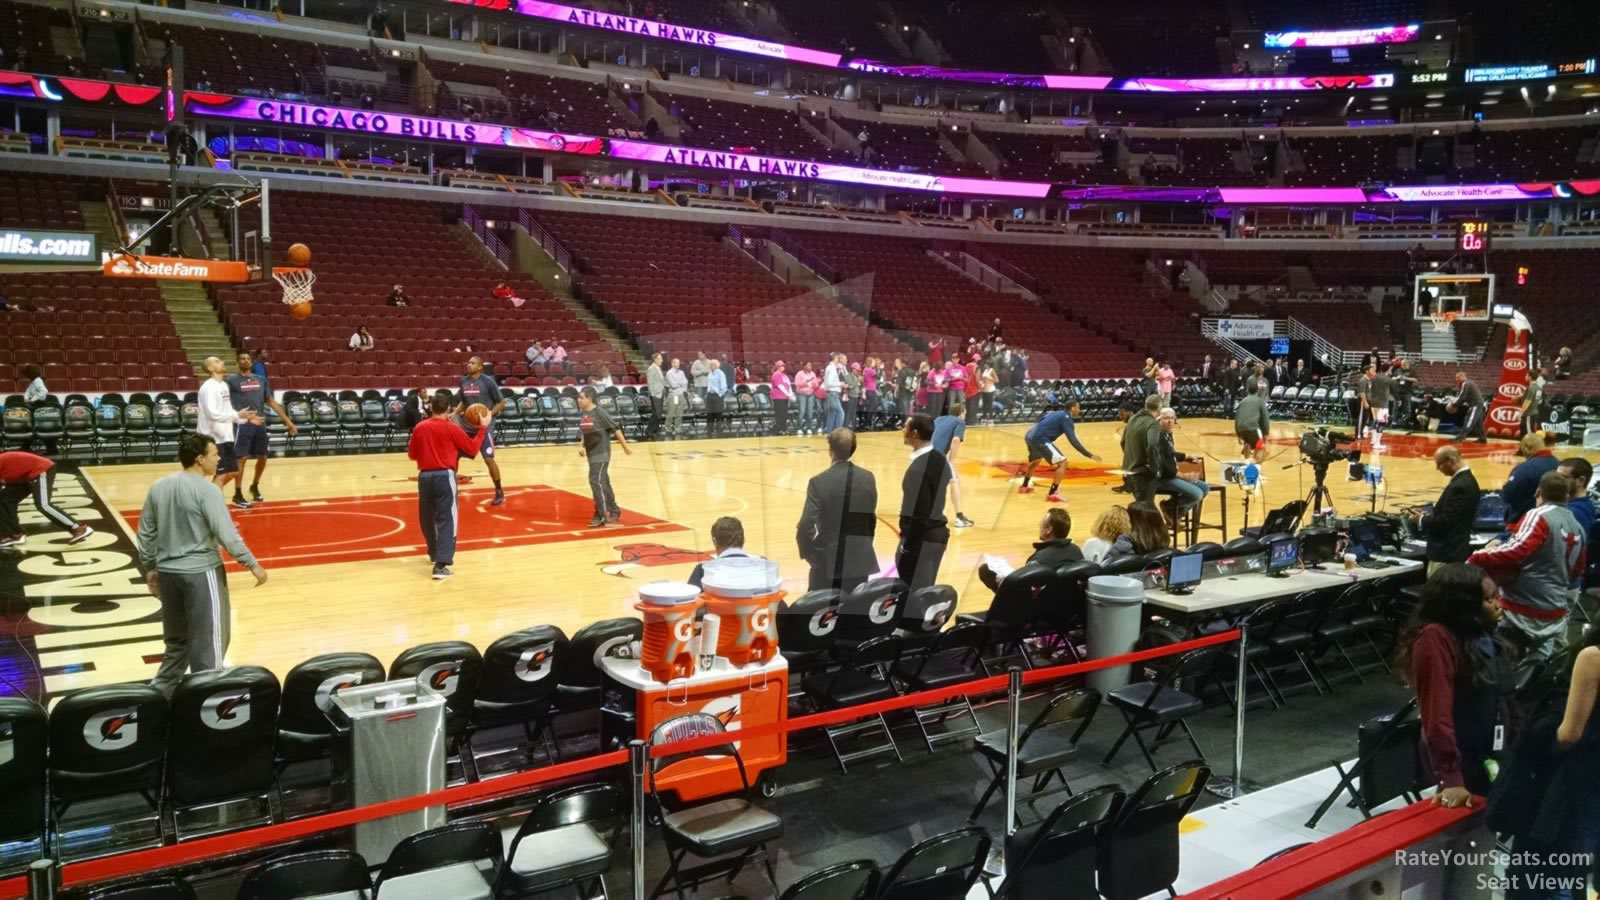 United Center Section 102 - Chicago Bulls - RateYourSeats.com